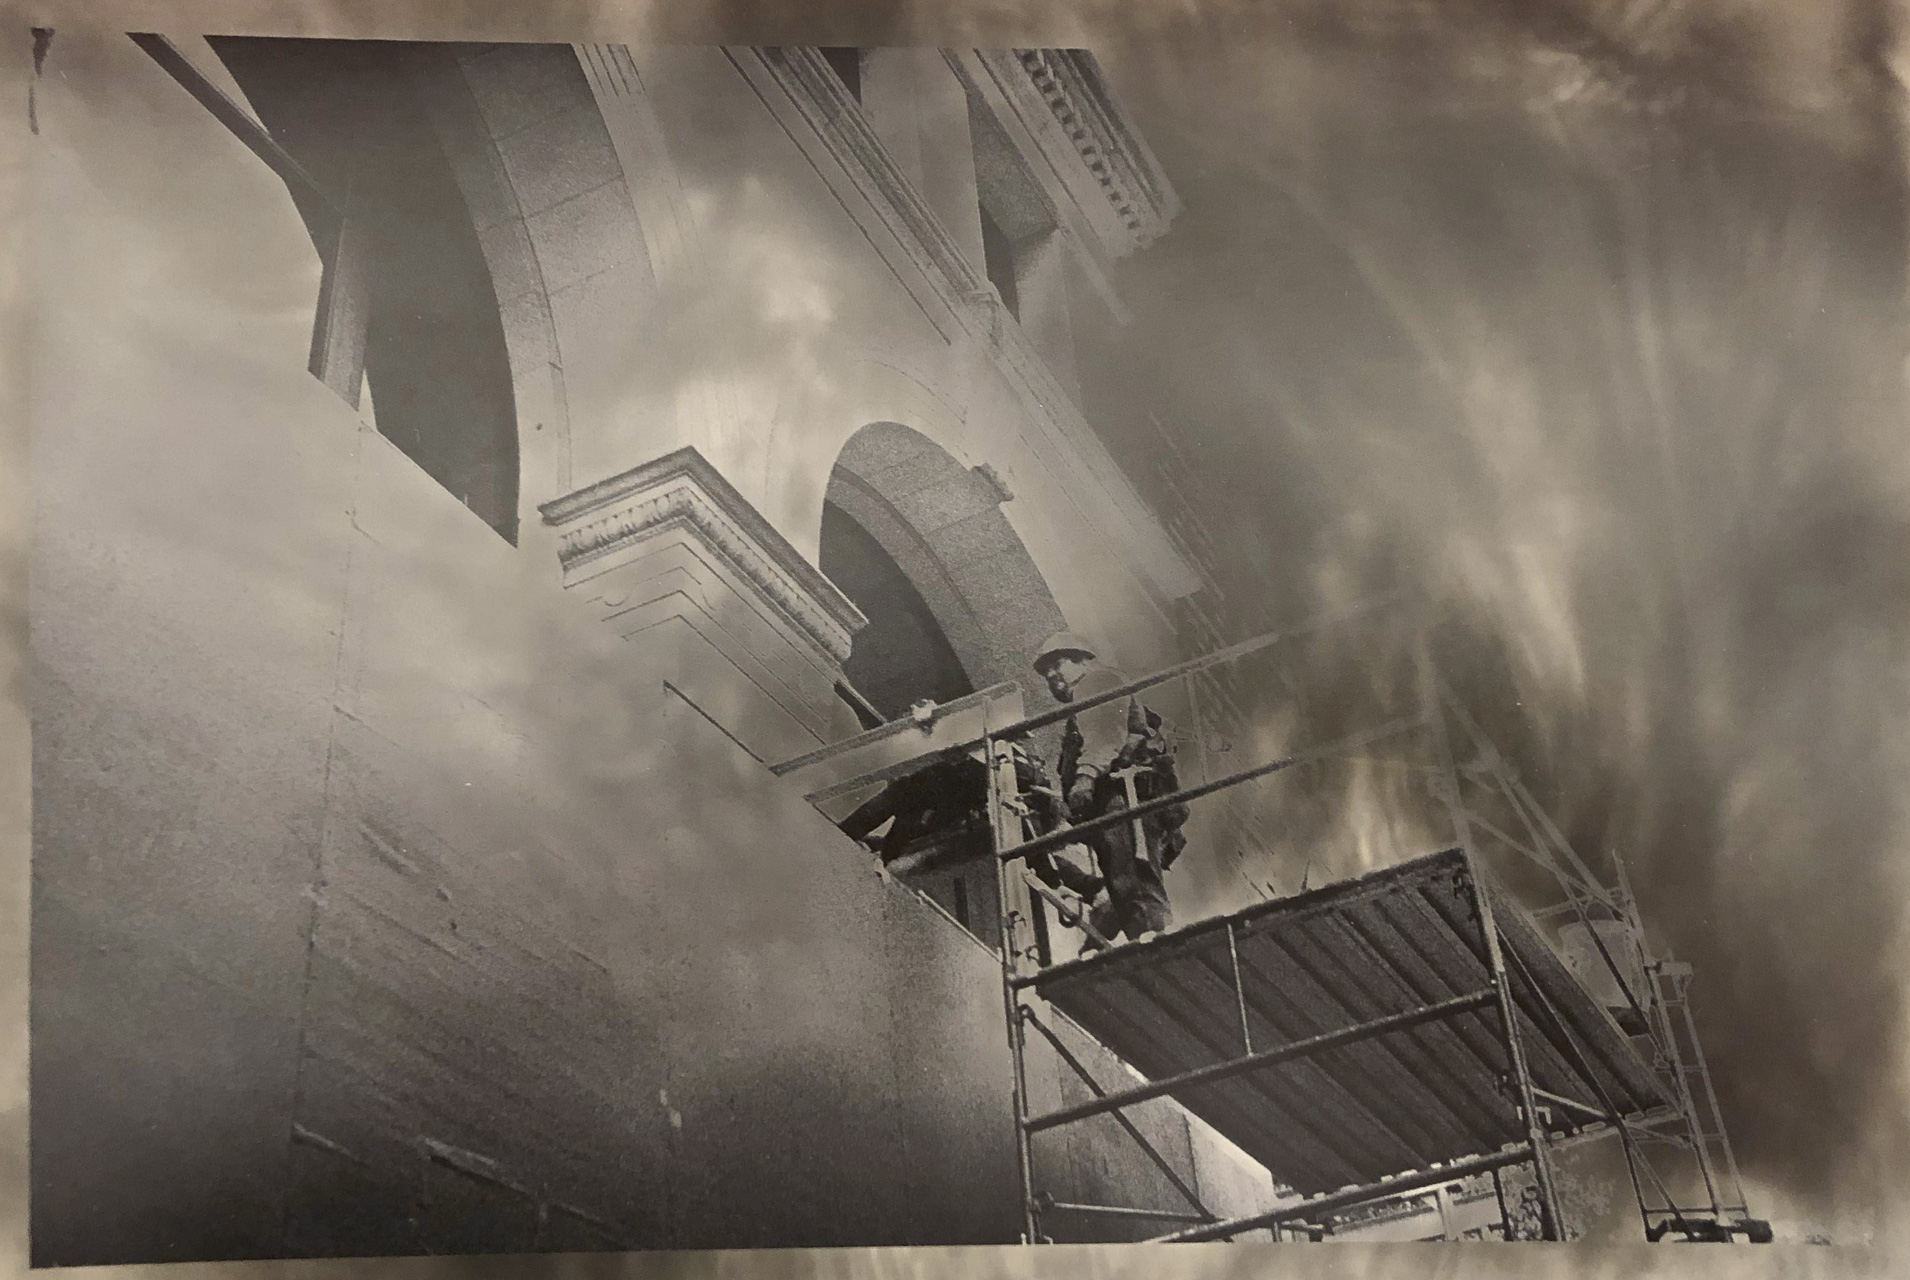 A person stands on top of scaffolding near a building facade in a solarized photograph